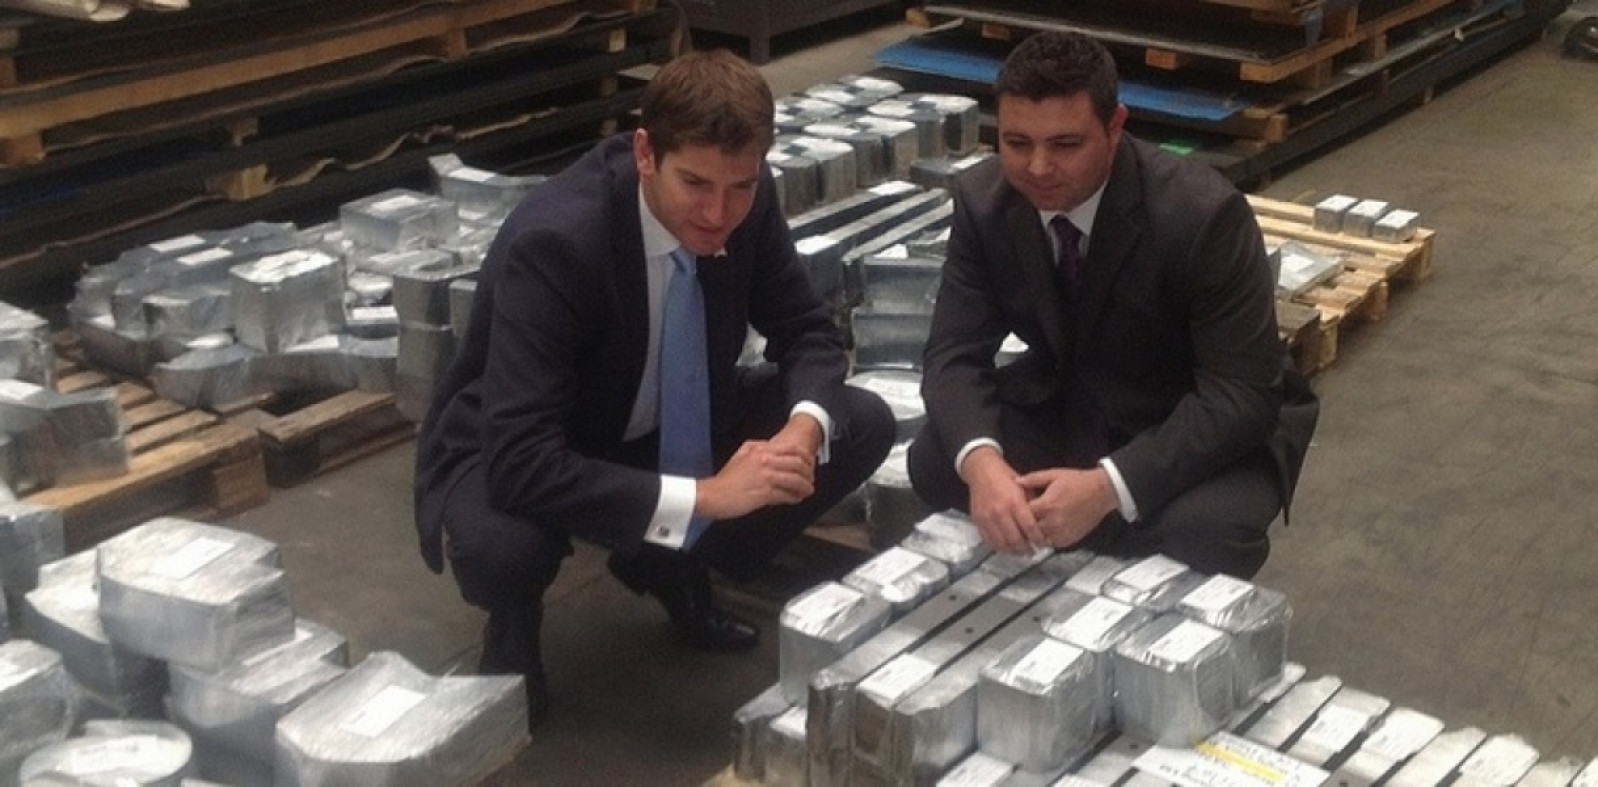 MP visits thriving laser cutting firm